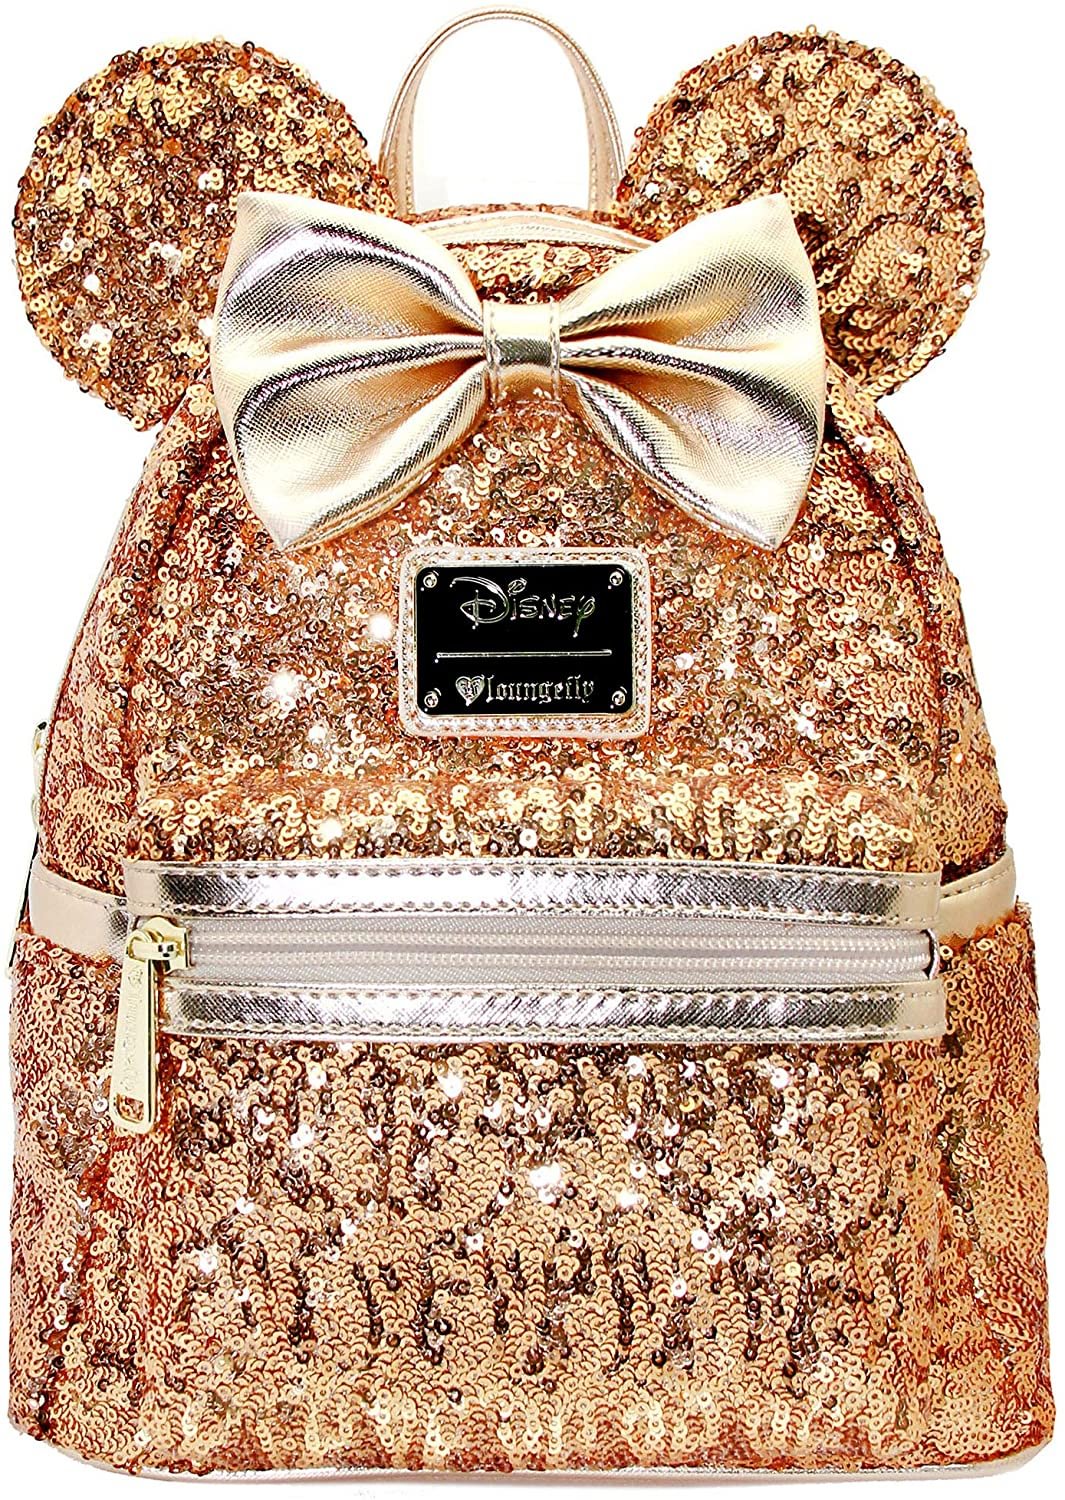 Gold Sequin Minnie Mini Backpack Holiday Gifts for Her LIMITED EDITION